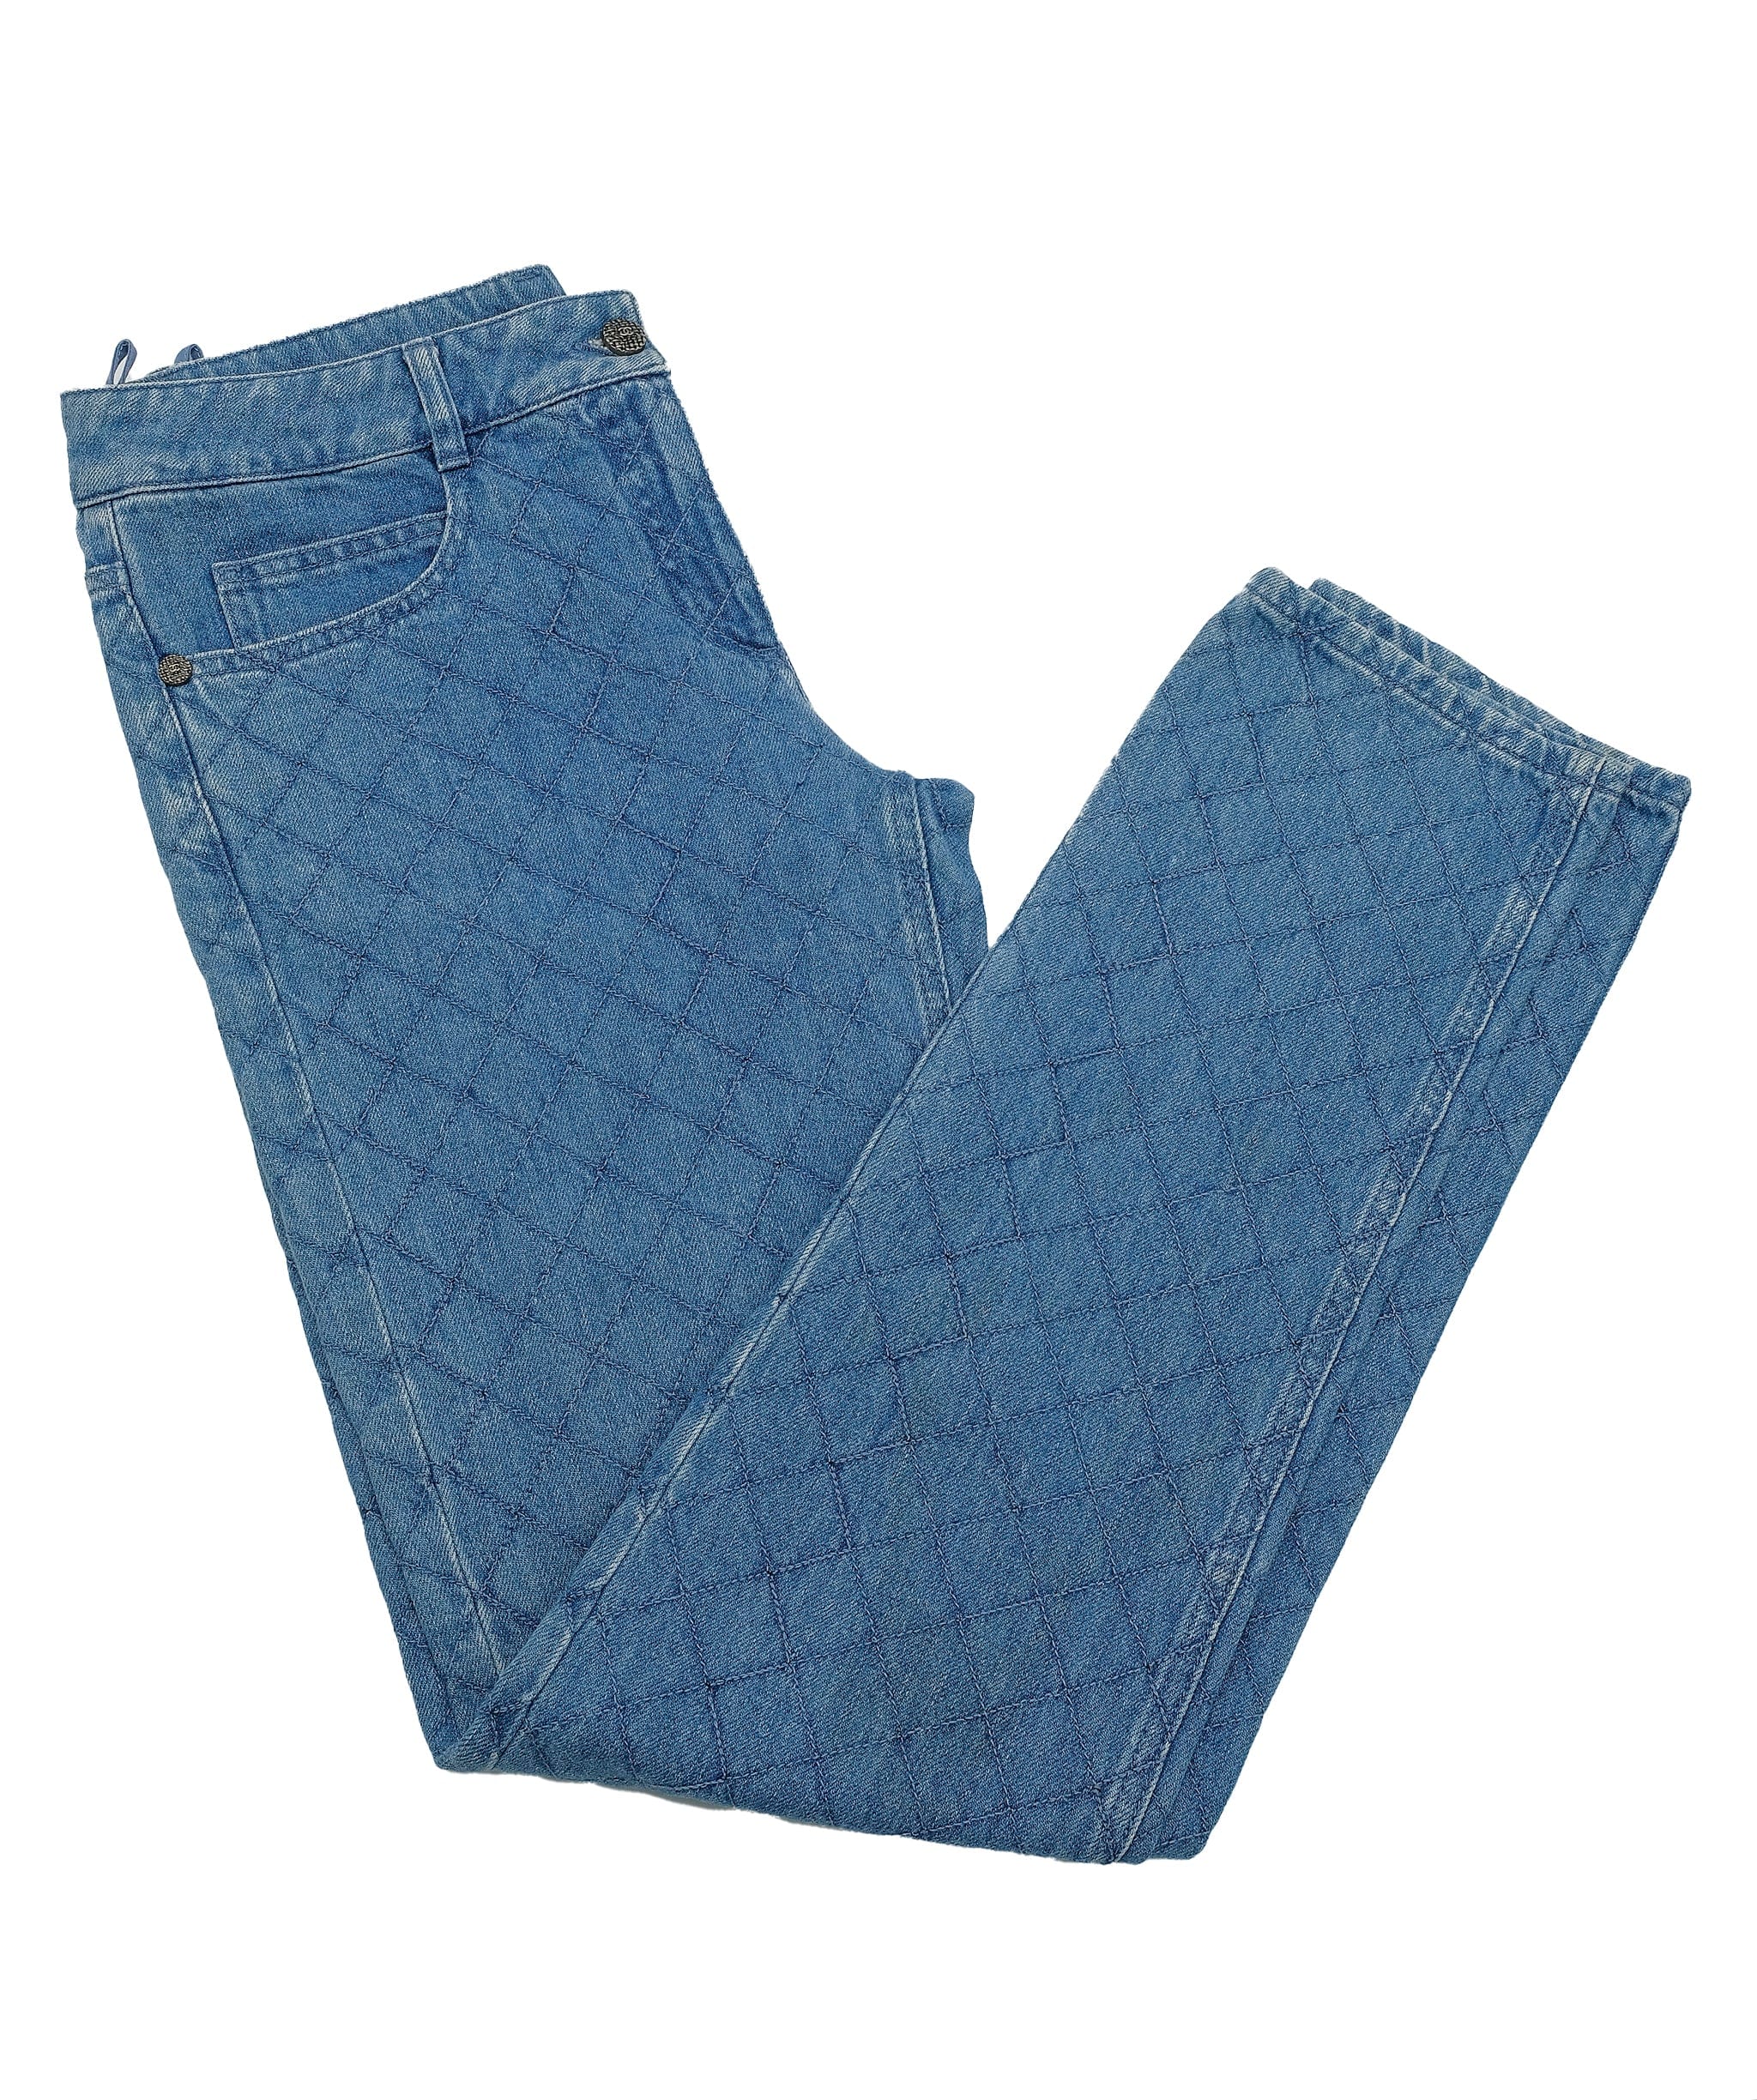 let's do it Governor Tyranny Chanel Denim Diamond Quilted Jeans REC1220 – LuxuryPromise